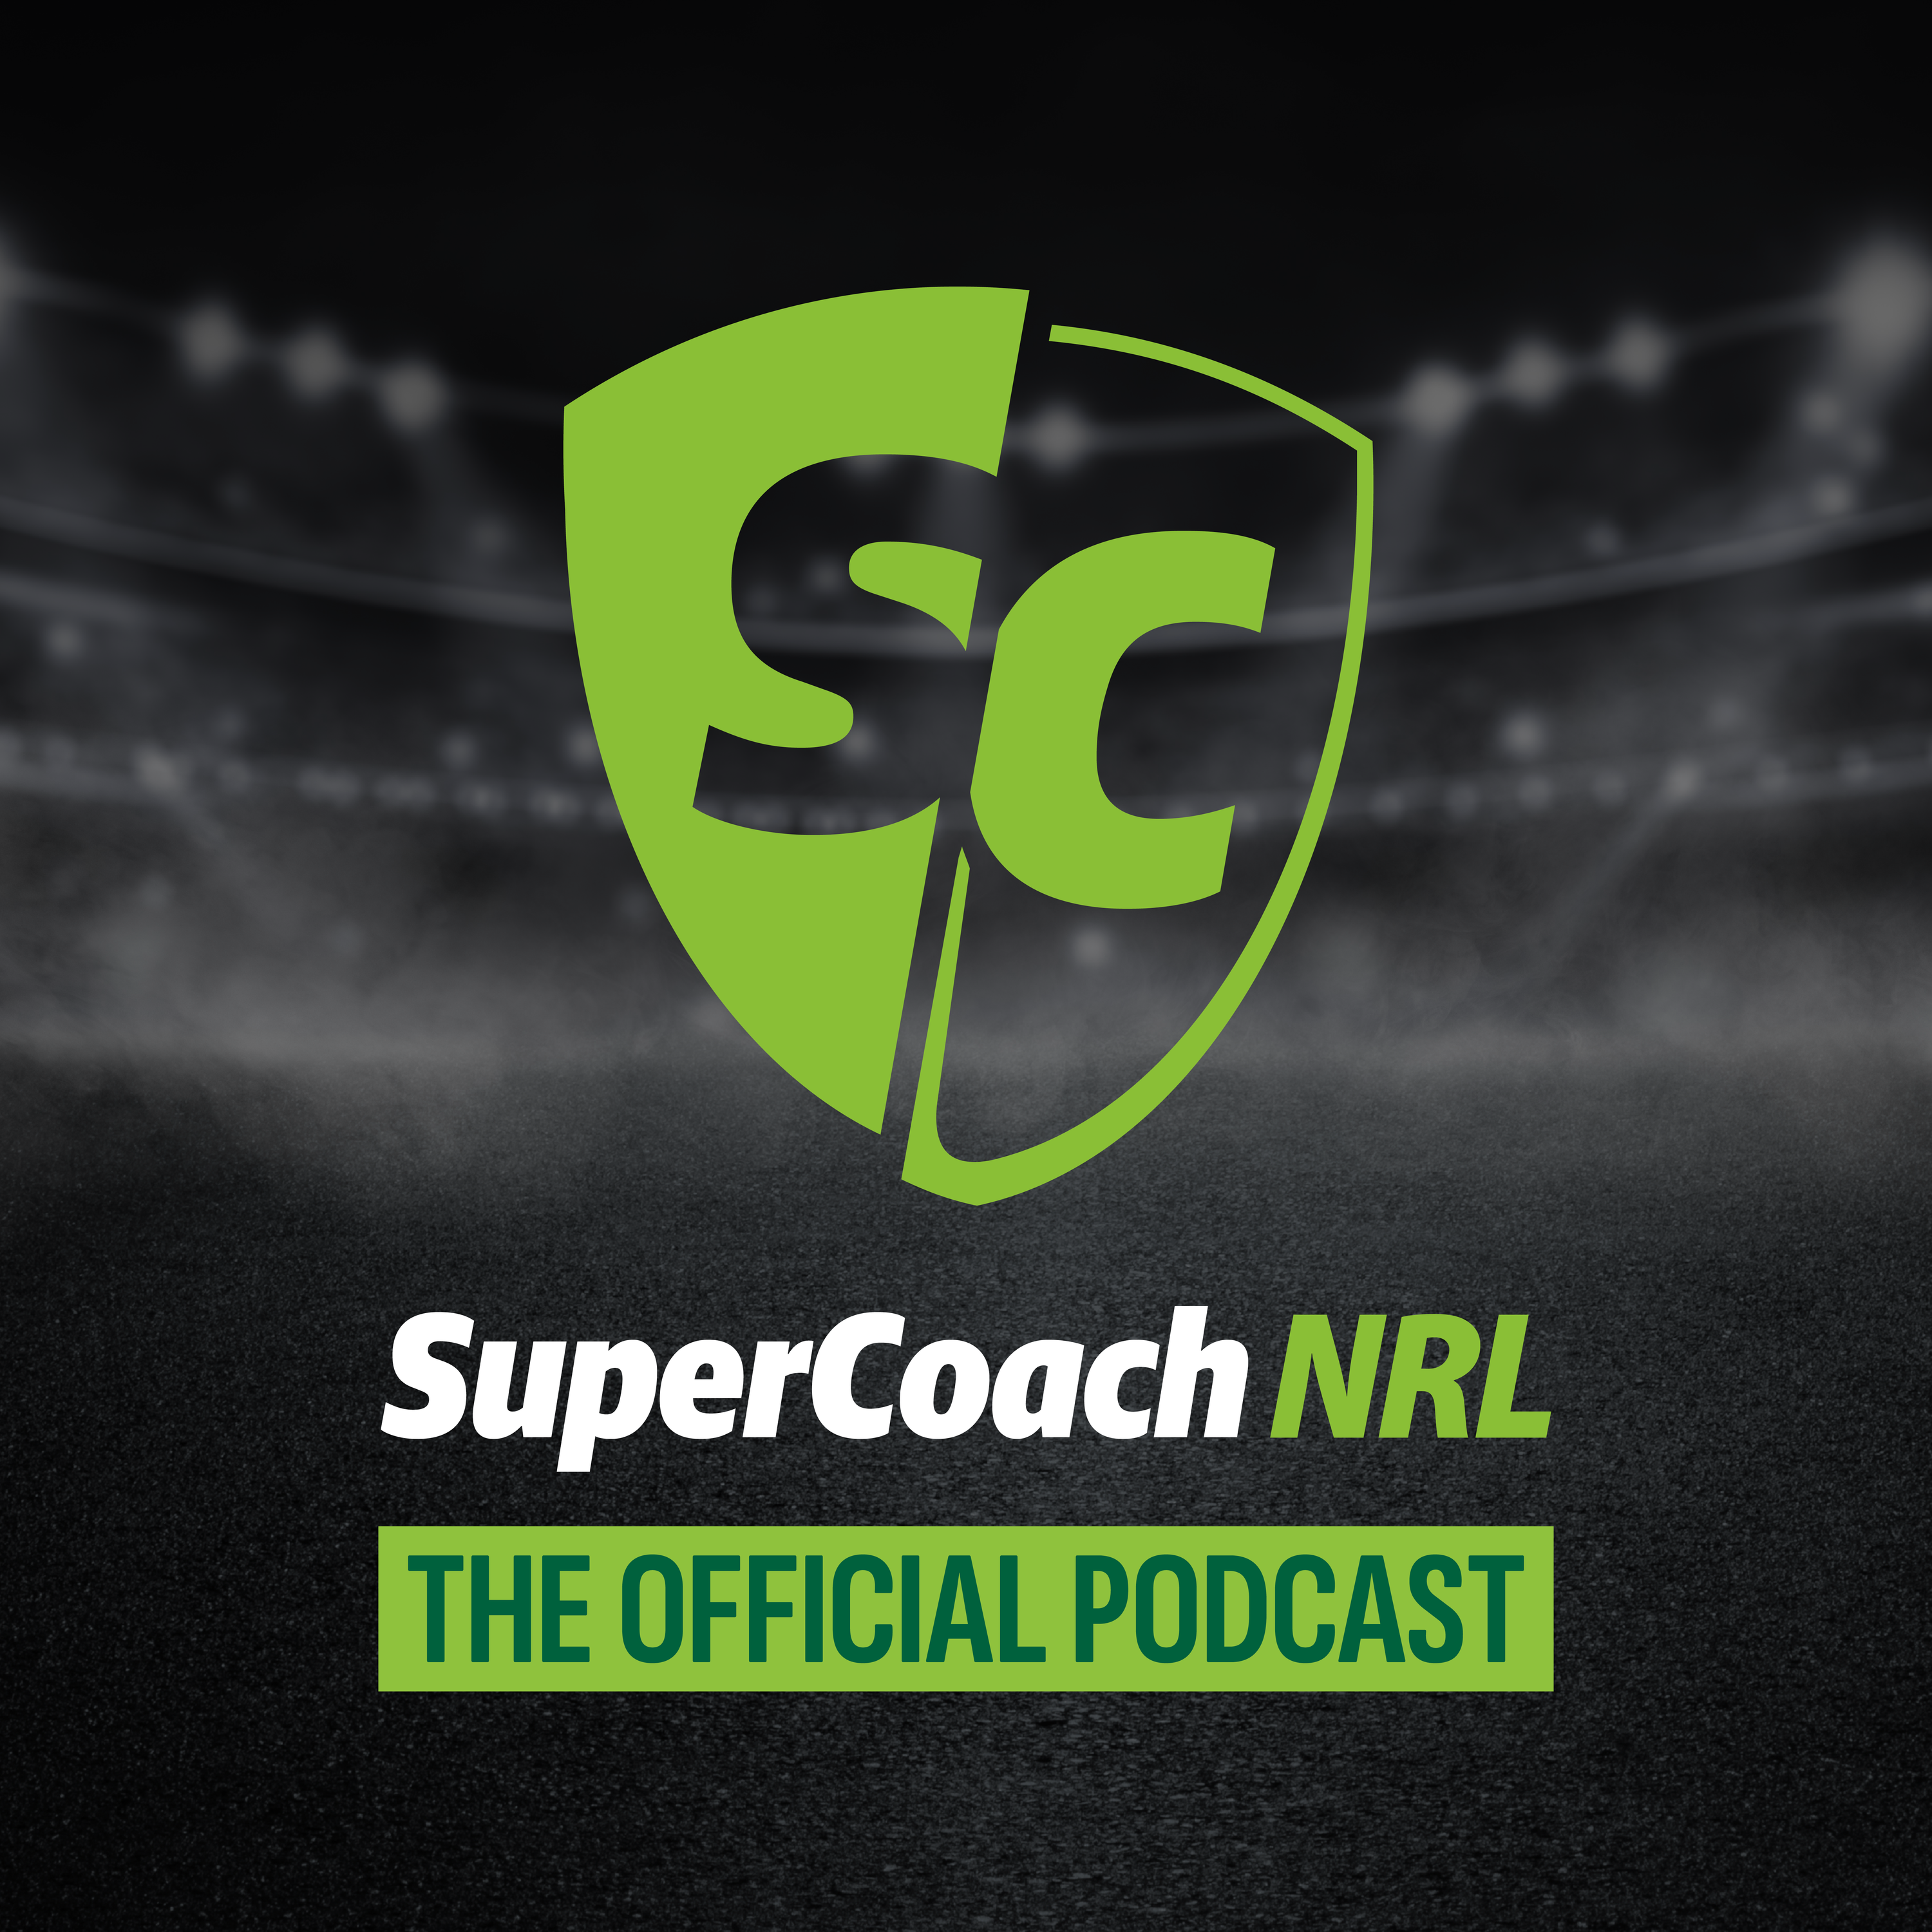 NRL SuperCoach podcast: Round 13 preview